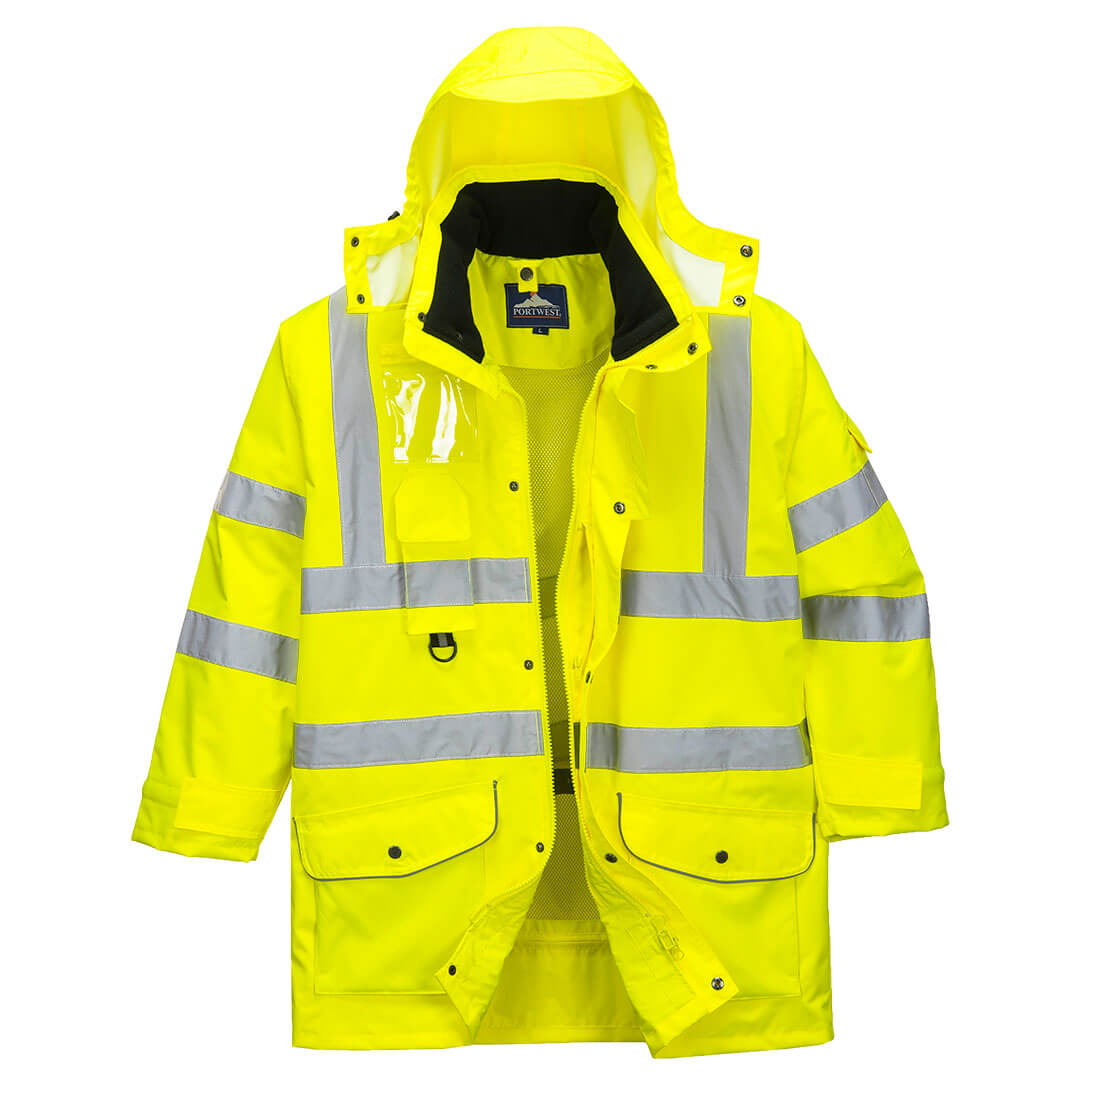 Image of Oxford Weave 300D Class 3 Hi Vis 7-in-1 Traffic Jacket Yellow S